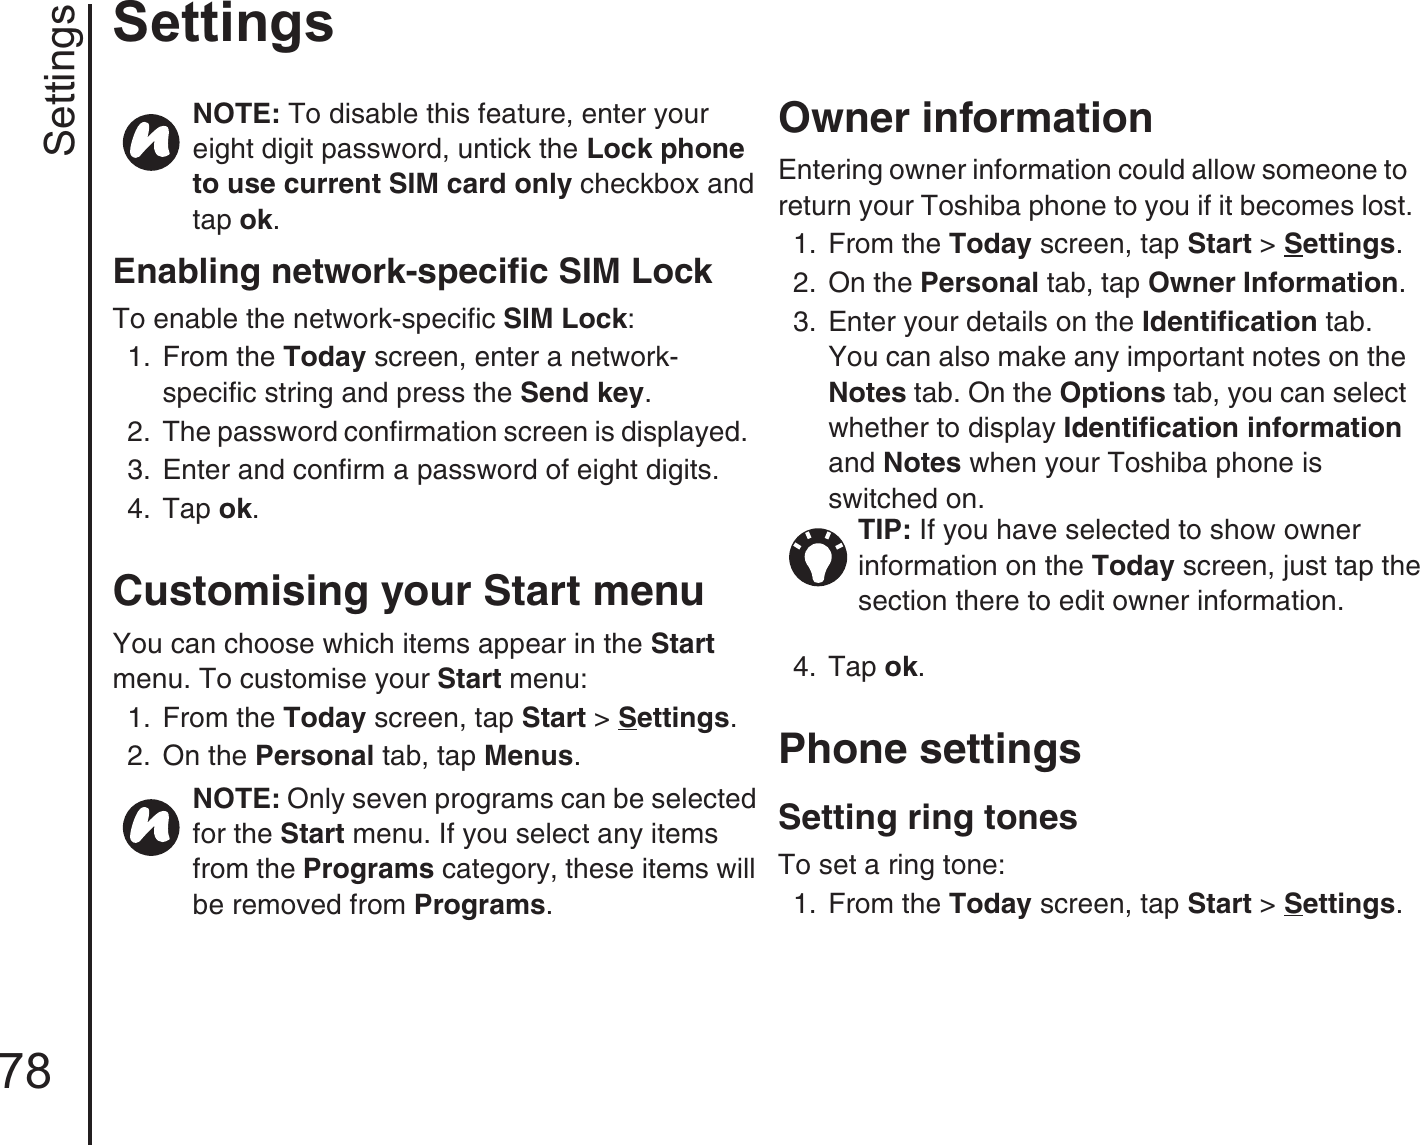 Settings78SettingsEnabling network-specific SIM LockTo enable the network-specific SIM Lock:1.  From the Today screen, enter a network-specific string and press the Send key.2.  The password confirmation screen is displayed.3.  Enter and confirm a password of eight digits.4.  Tap ok.Customising your Start menuYou can choose which items appear in the Start menu. To customise your Start menu:1.  From the Today screen, tap Start &gt; Settings.2.  On the Personal tab, tap Menus.Owner information Entering owner information could allow someone to return your Toshiba phone to you if it becomes lost.1.  From the Today screen, tap Start &gt; Settings.2.  On the Personal tab, tap Owner Information. 3.  Enter your details on the Identification tab. You can also make any important notes on the Notes tab. On the Options tab, you can select whether to display Identification information and Notes when your Toshiba phone is switched on.4.  Tap ok. Phone settingsSetting ring tonesTo set a ring tone:1.  From the Today screen, tap Start &gt; Settings.NOTE: To disable this feature, enter your eight digit password, untick the Lock phone to use current SIM card only checkbox and tap ok.NOTE: Only seven programs can be selected for the Start menu. If you select any items from the Programs category, these items will be removed from Programs.TIP: If you have selected to show owner information on the Today screen, just tap the section there to edit owner information.